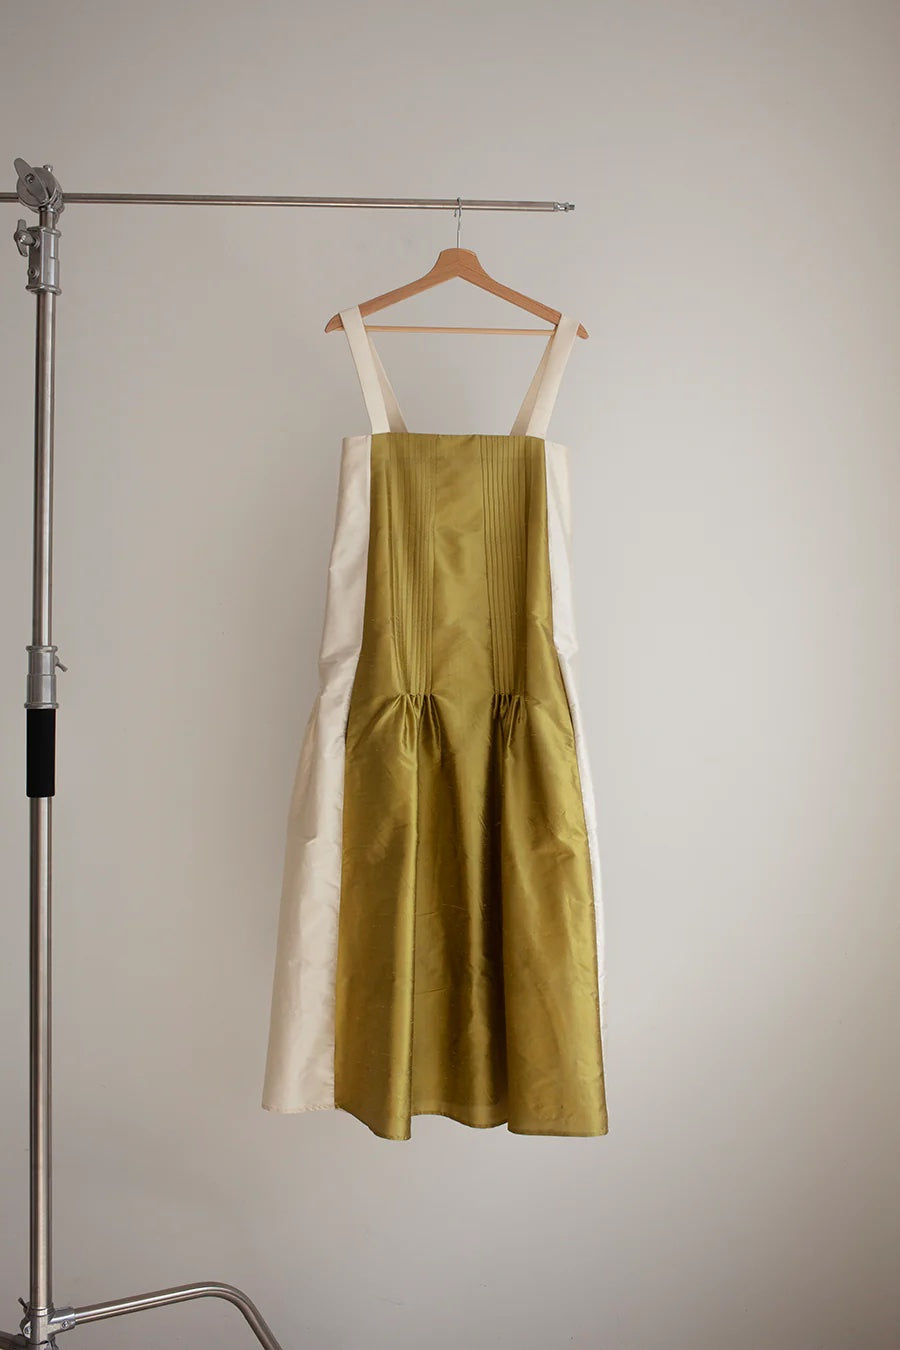 The Modern Sewing Co. Sienna Dress